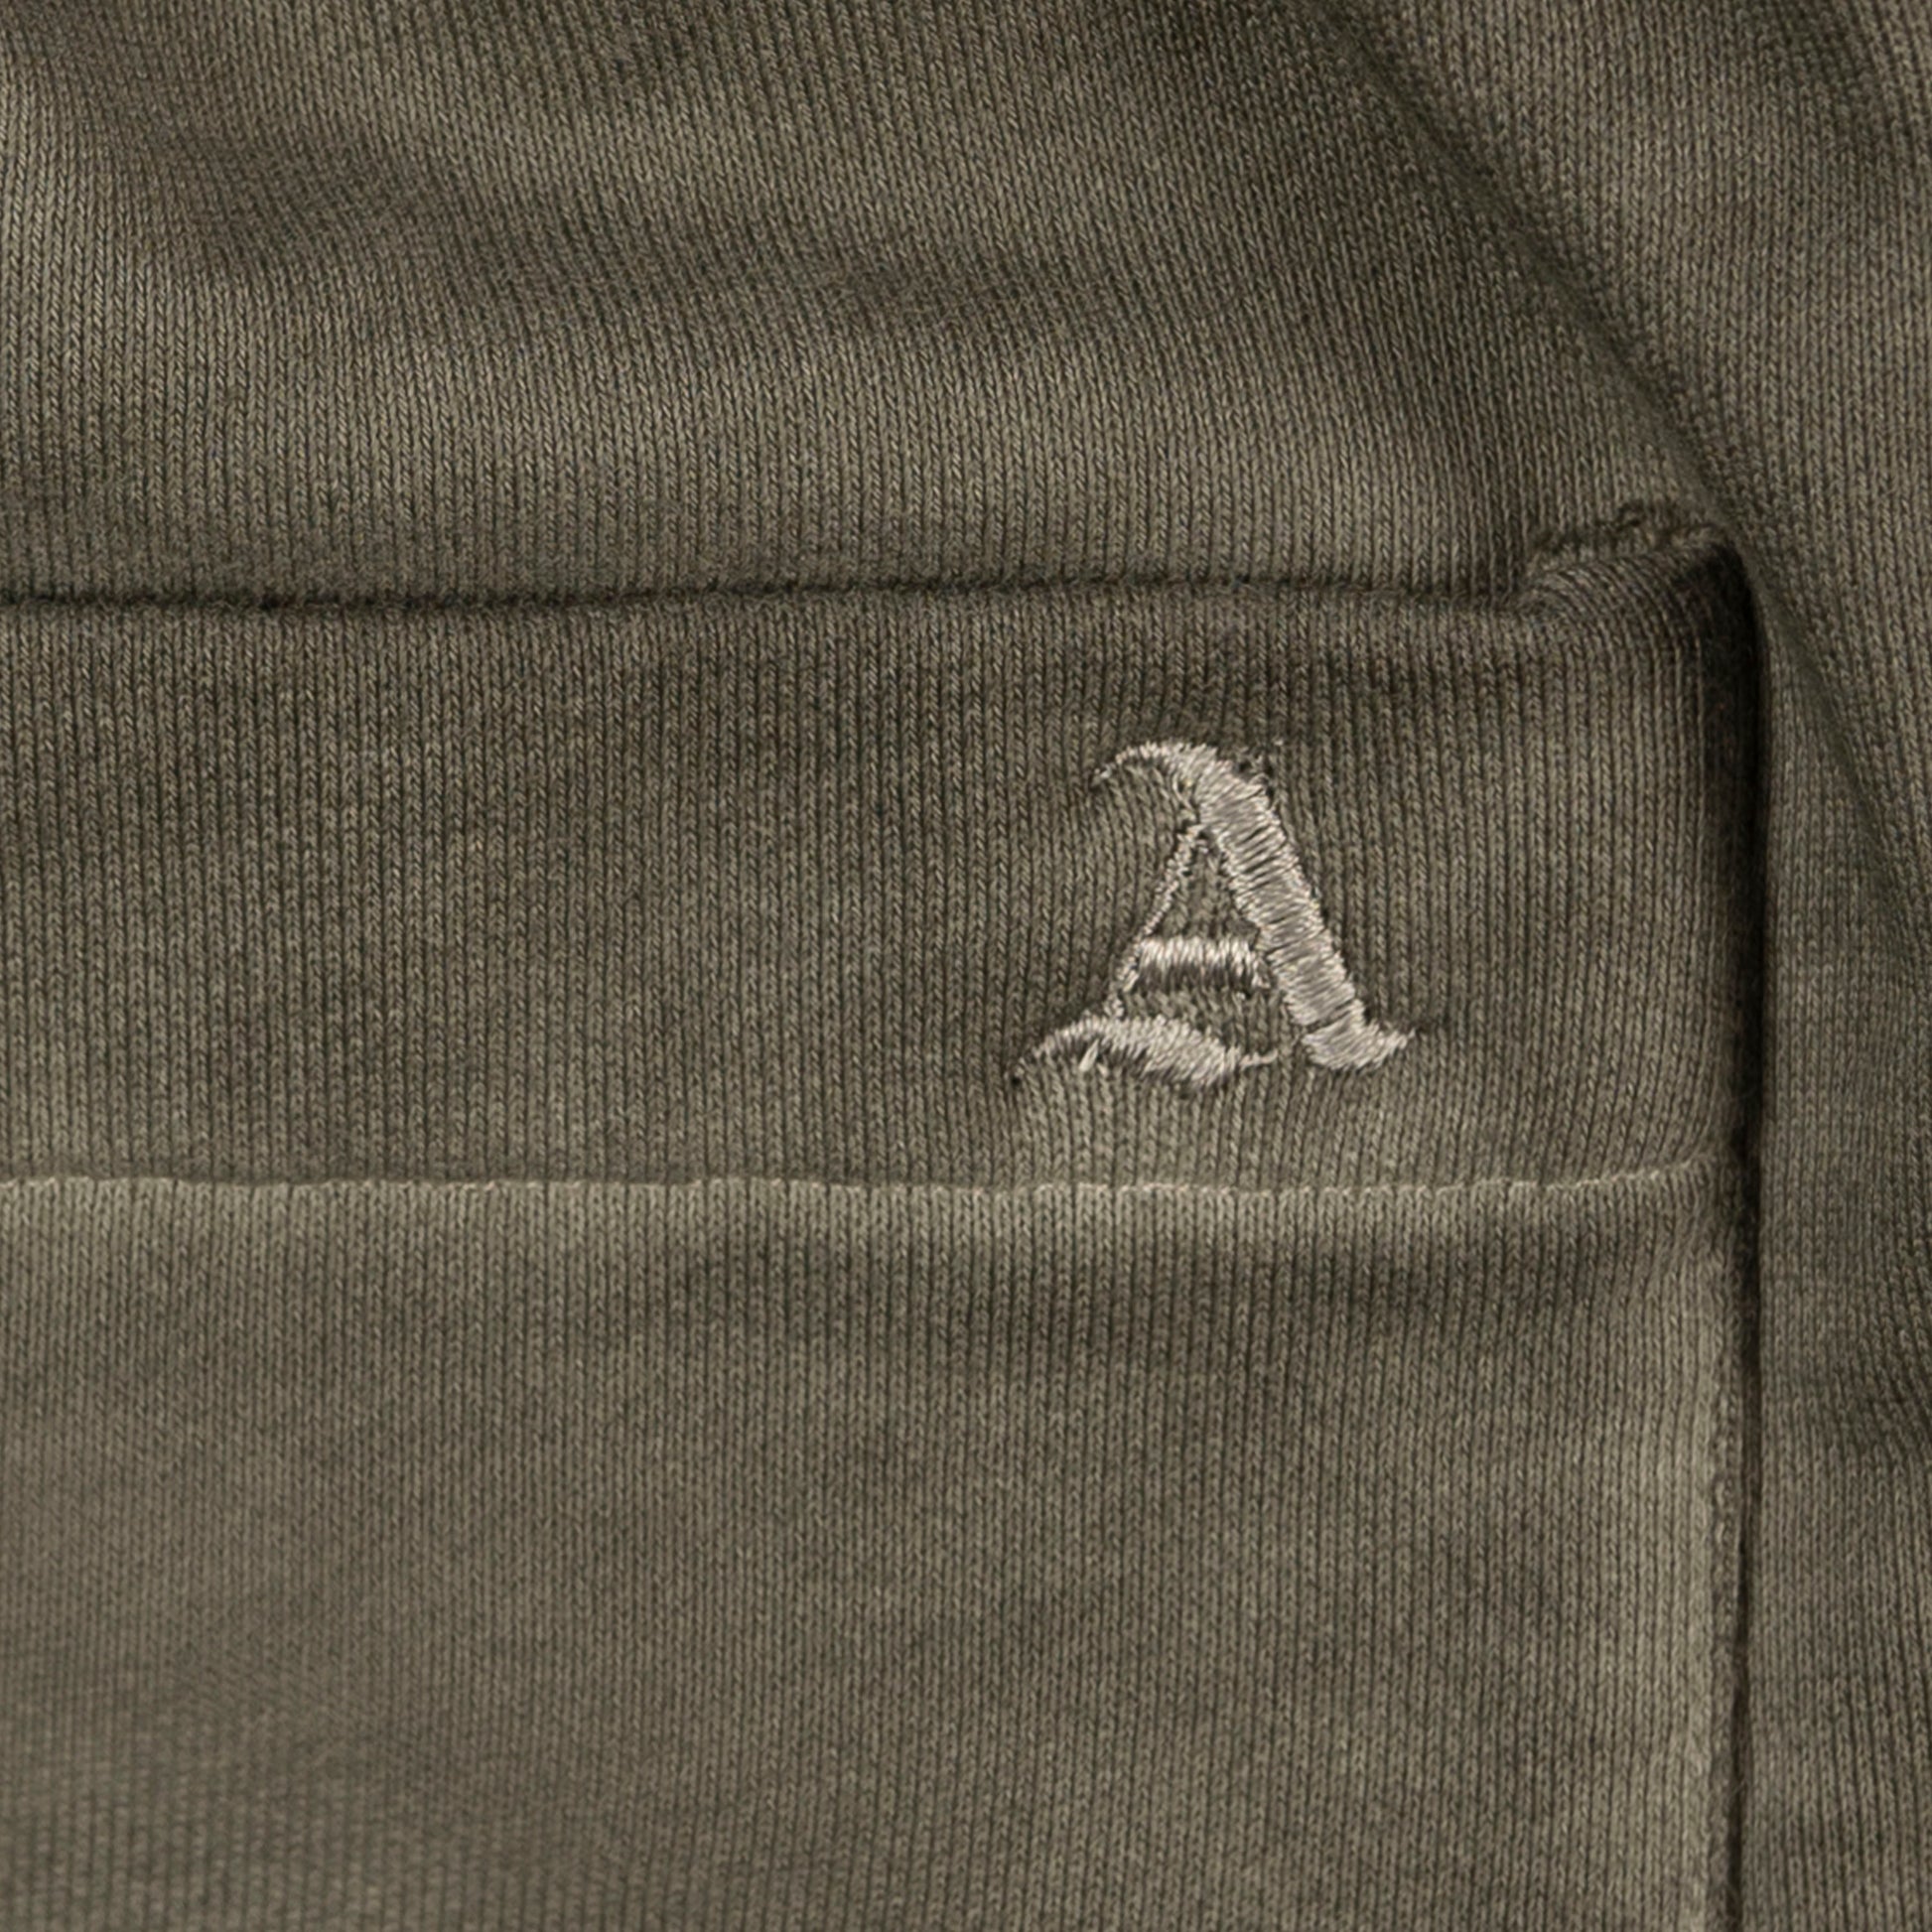 Detail View of Embroidered Signature 'A' Logo on Allora Track Pants by Aseye Studio